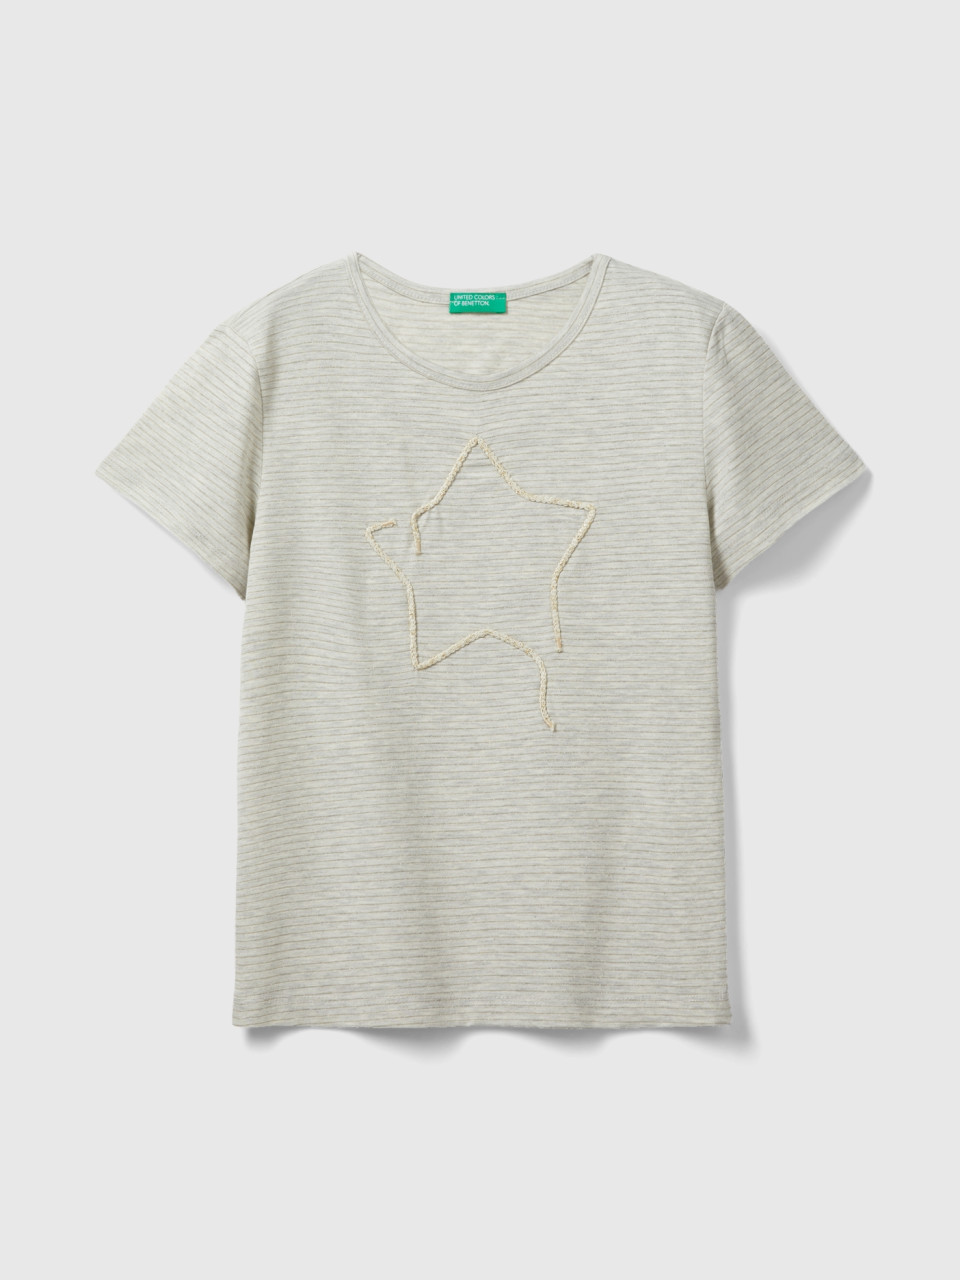 Benetton, T-shirt With Cord Embroidery, Light Gray, Kids